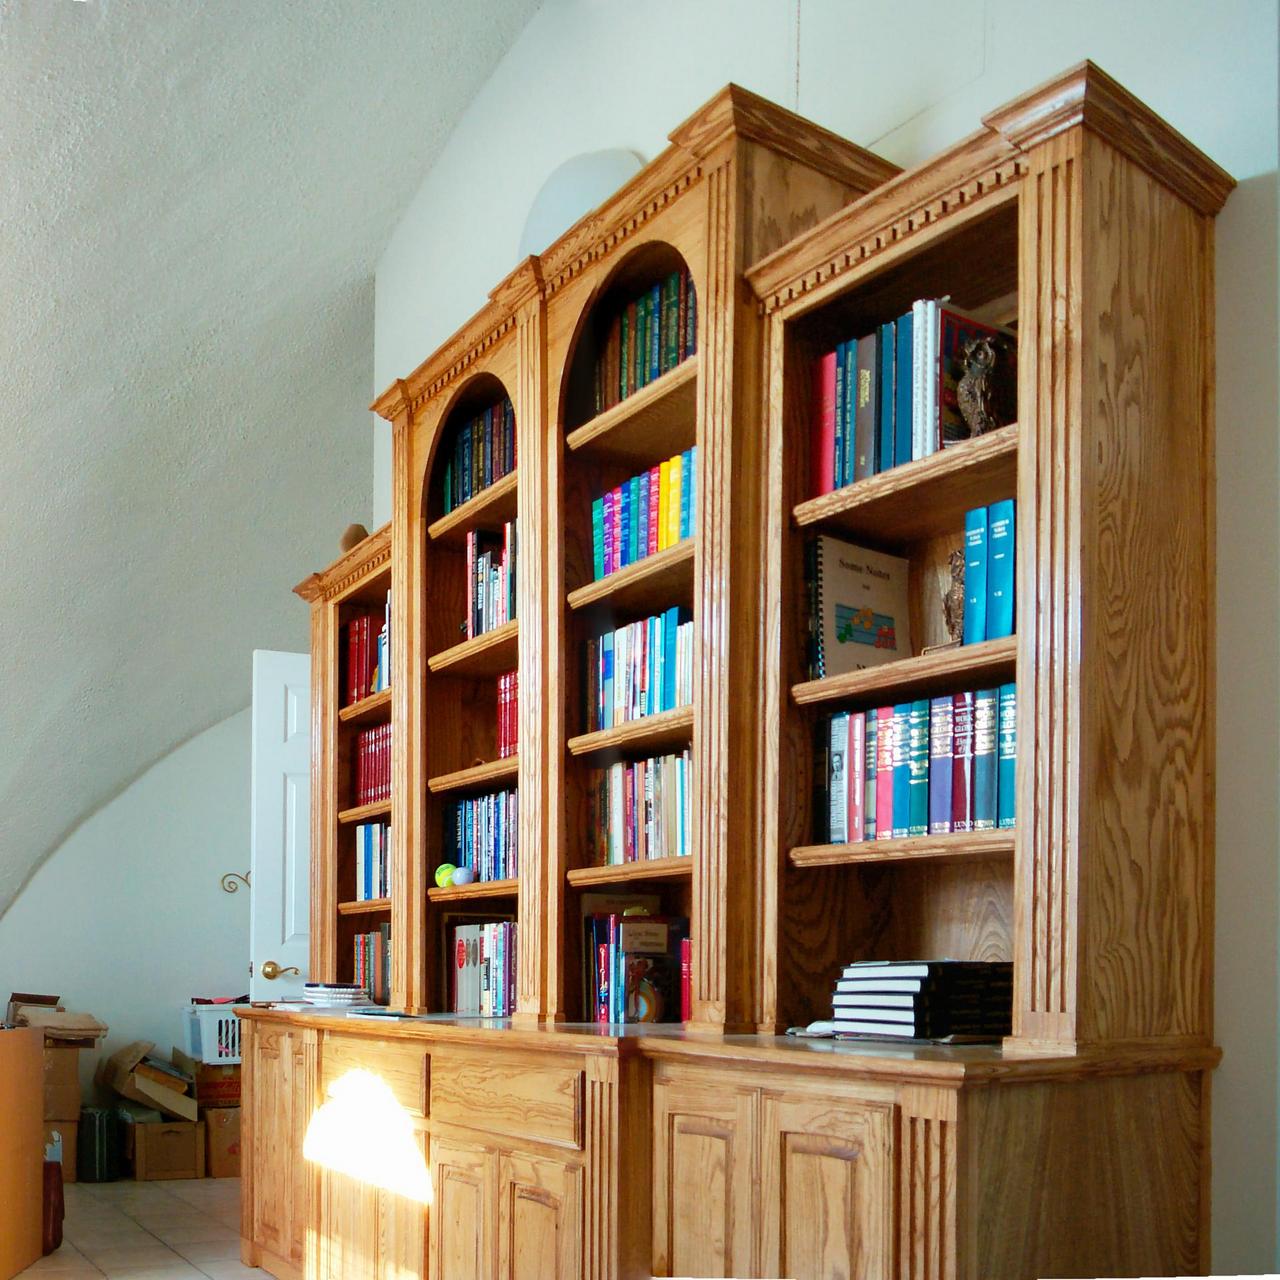 Hand crafted shelves and cabinets